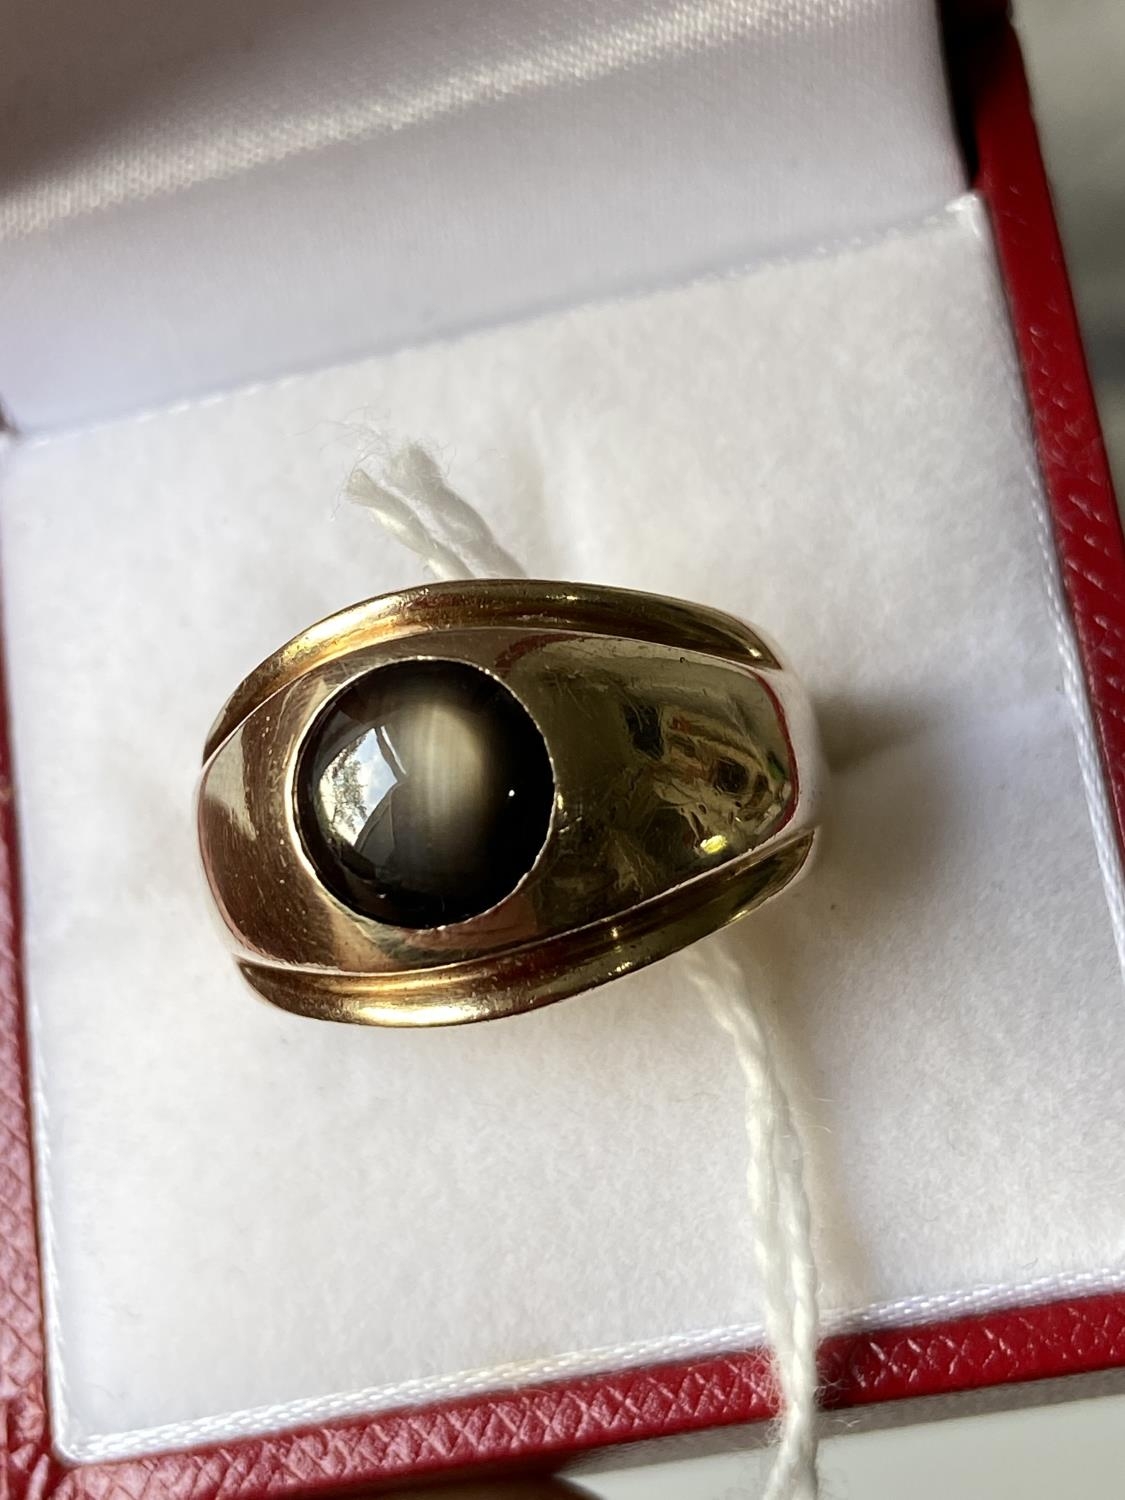 An 18ct gold gents ring set with a single star sapphire/ Cats eye style stone. [size 0] [9.86g] - Image 4 of 8